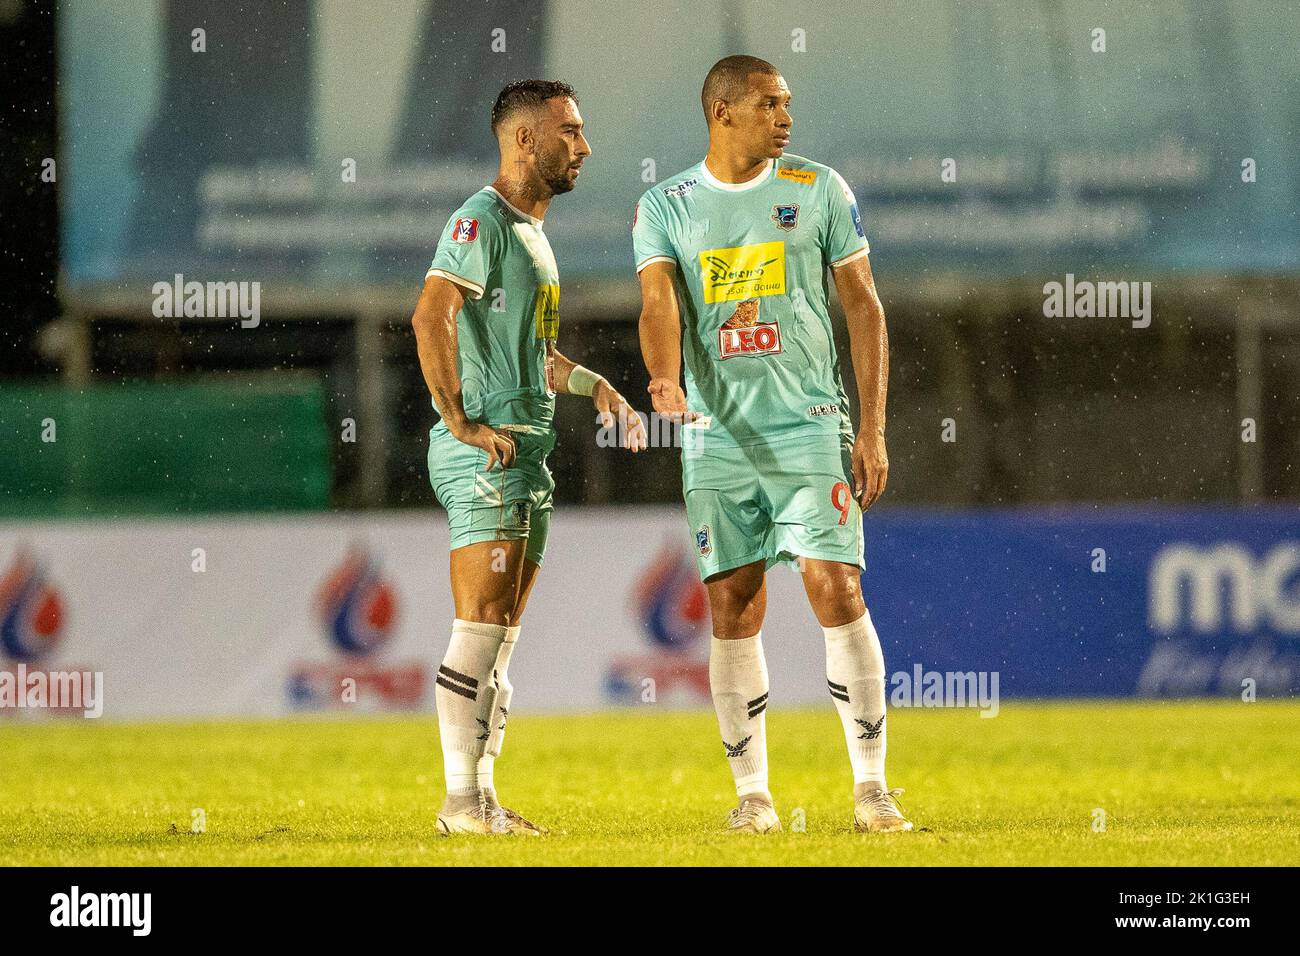 PATTAYA, THAILAND - SEPTEMBER 18: CAIQUE FREITAS RIBEIRO of Pattaya Dolphins United and DANILO LOPES CEZARIO of Pattaya Dolphins United  during the Thai League 3 East match between Pattaya Dolphins and Marines Eureka  at Nong Prue Stadium on September 18, 2022 in PATTAYA, THAILAND (Photo by Peter van der Klooster/Alamy Live News) Stock Photo